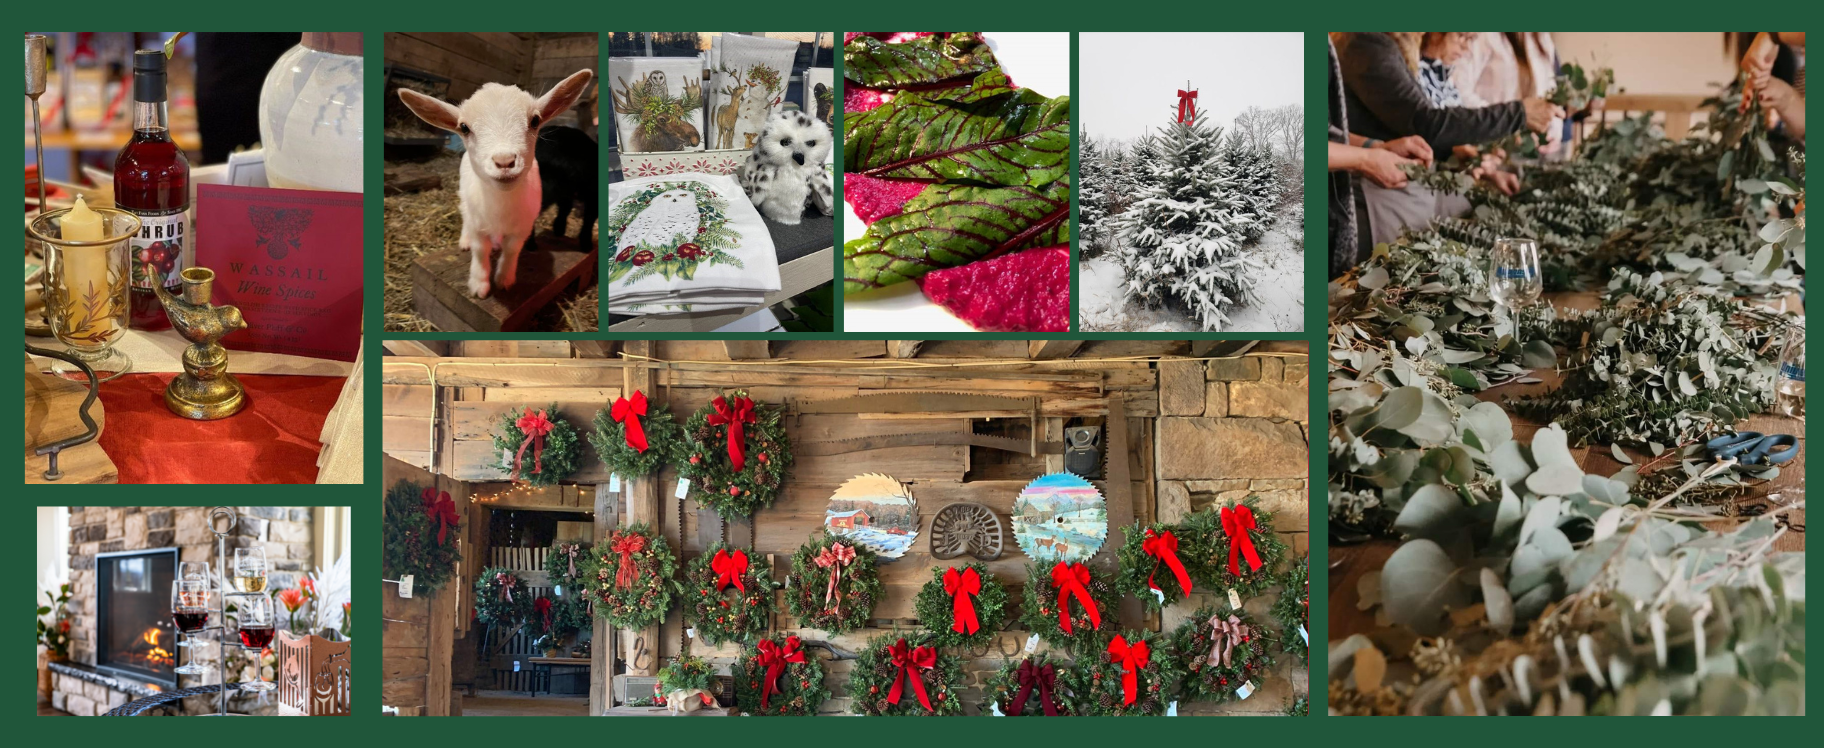 ‘Tis the season for holiday ag shopping… don’t forget all on your list!